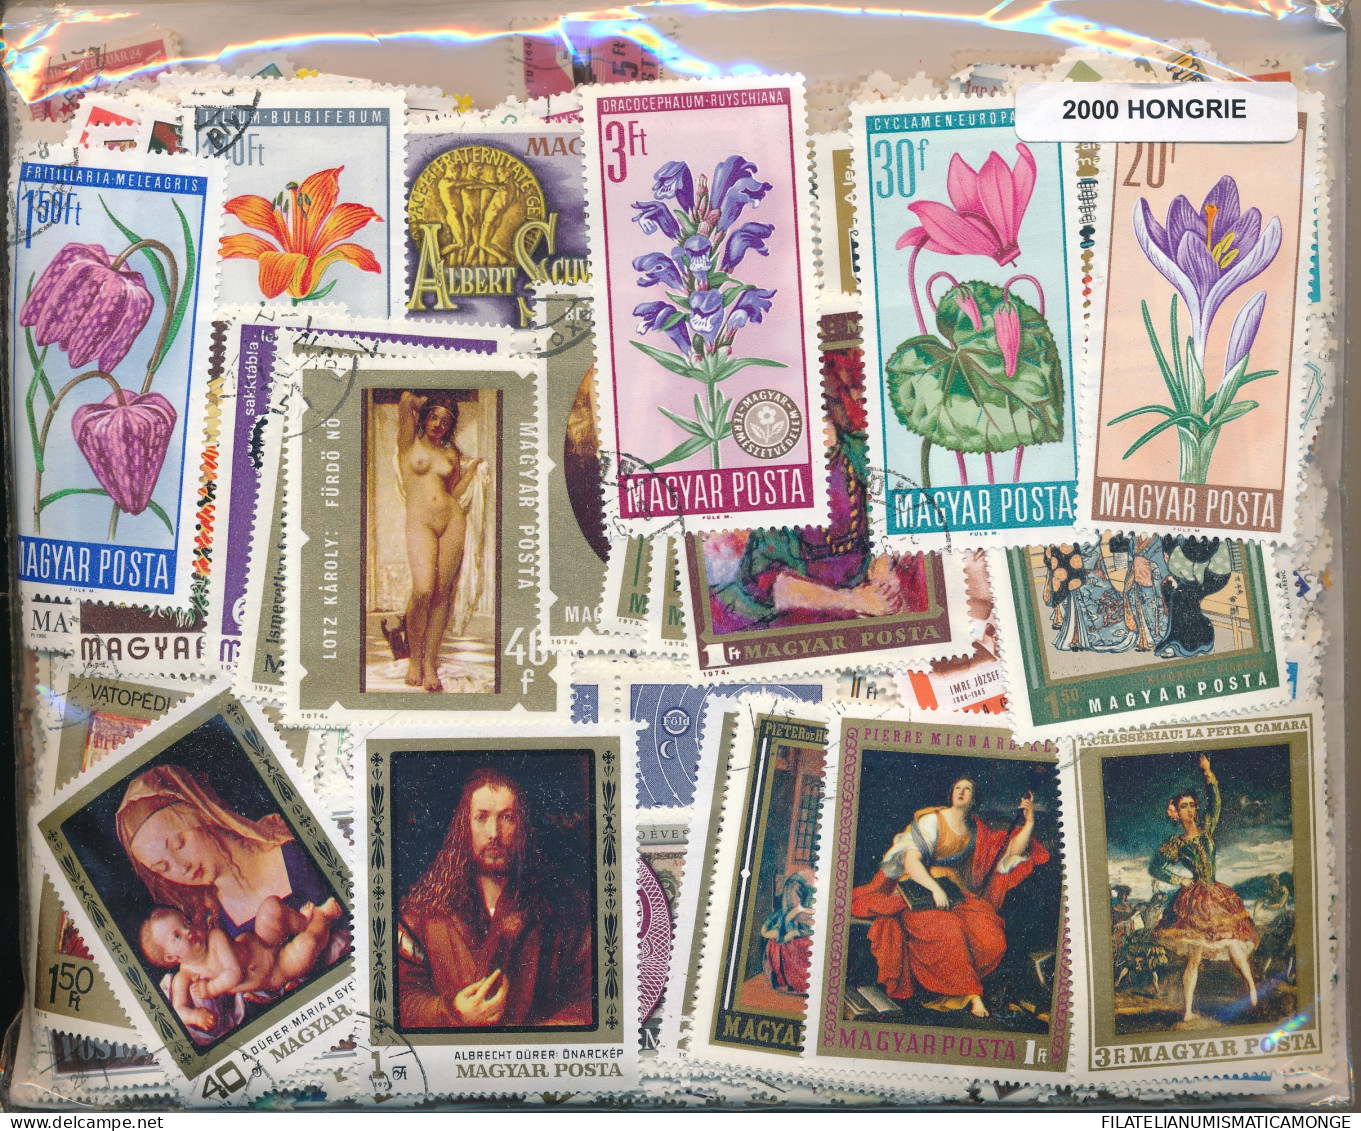  Offer - Lot Stamps - Paqueteria  Hungría 2000 Sellos Diferentes            - Lots & Kiloware (mixtures) - Min. 1000 Stamps